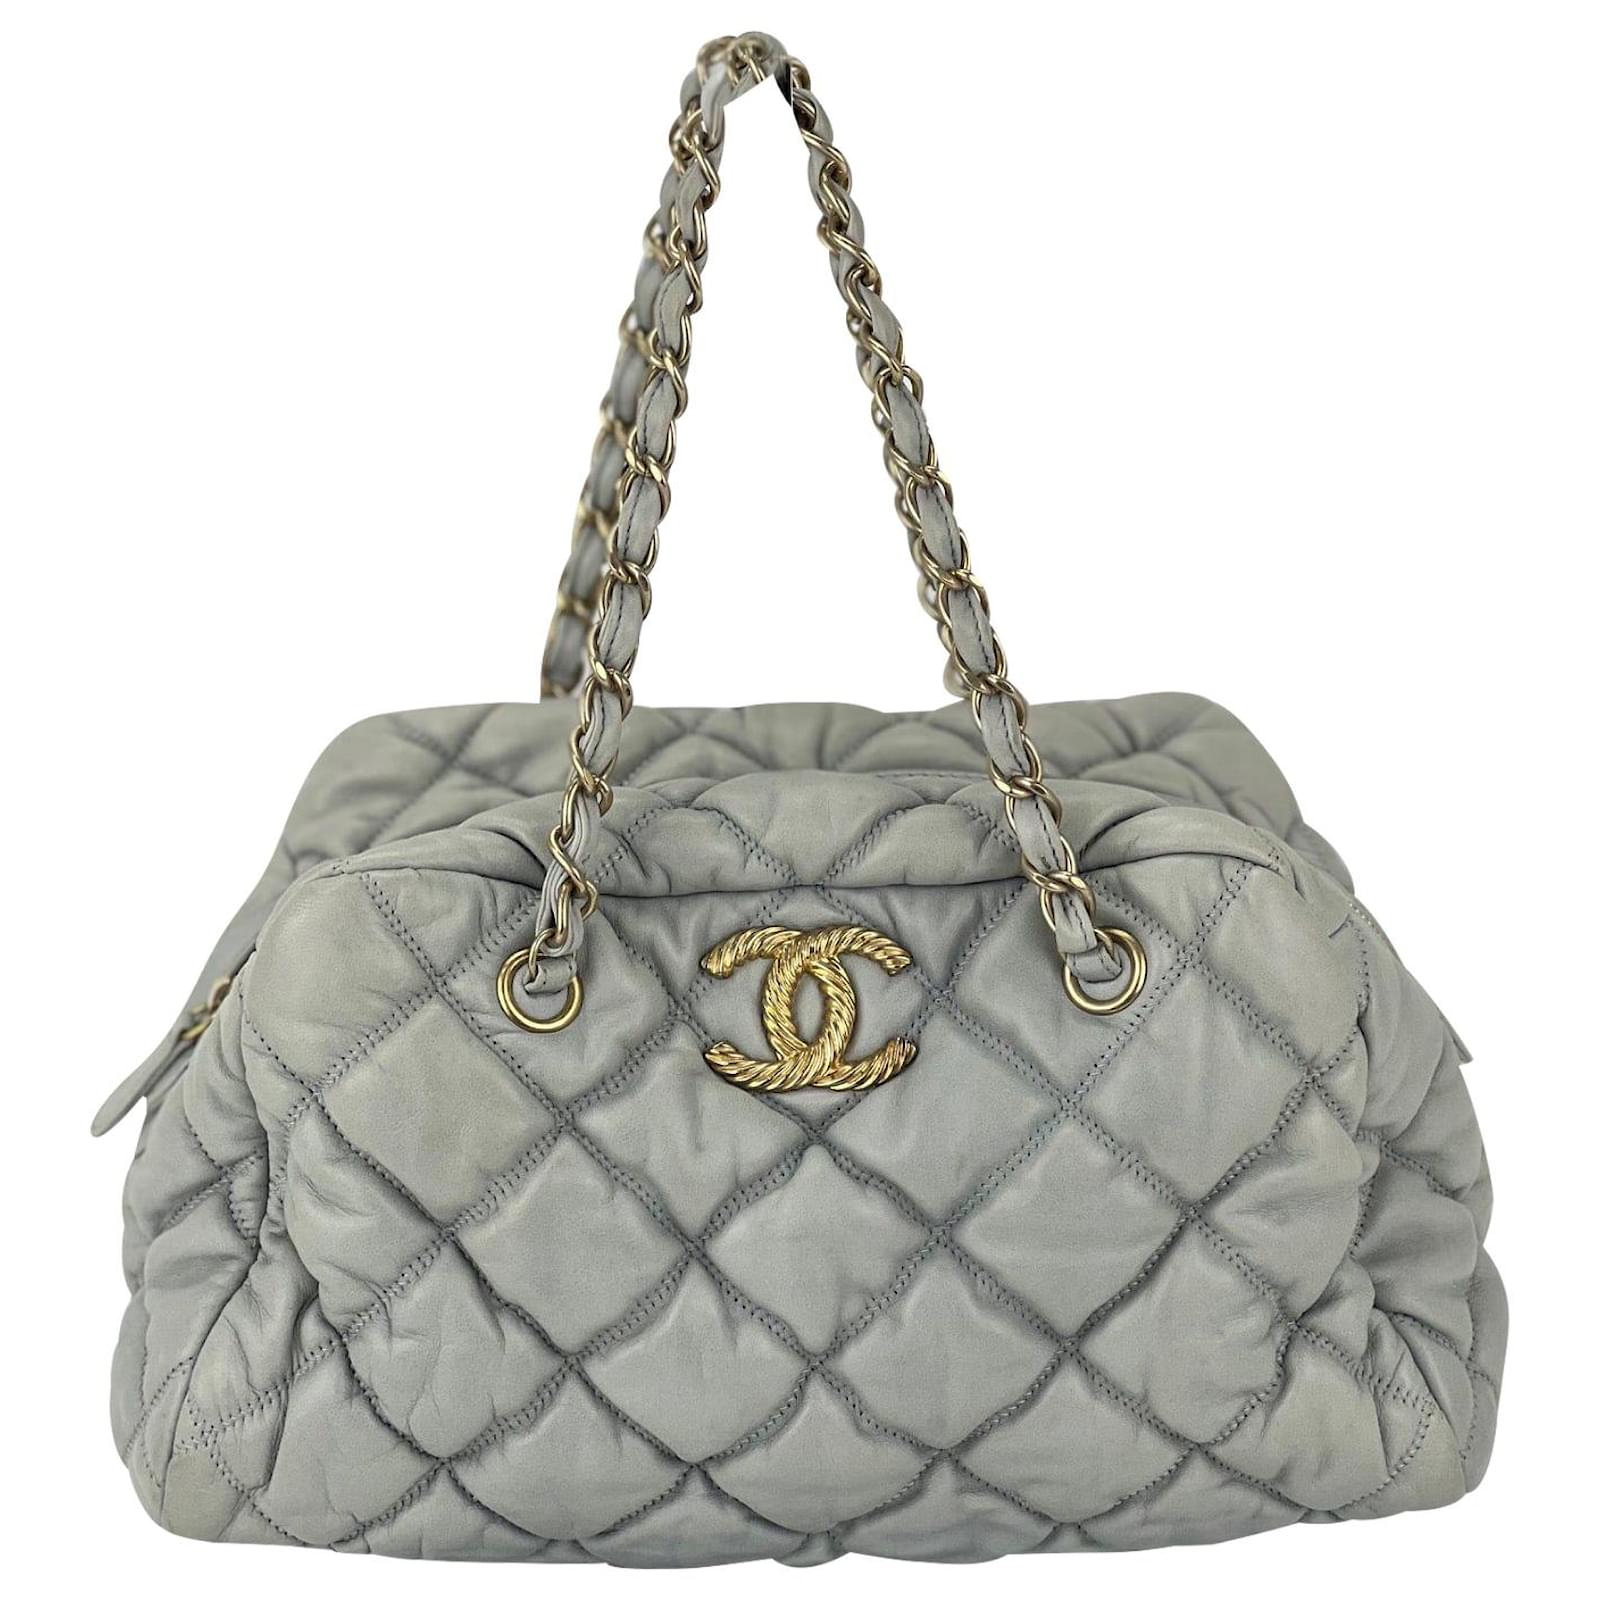 Chanel Handbag Large Bubbled Quilted Grey Bowler Soft Leather